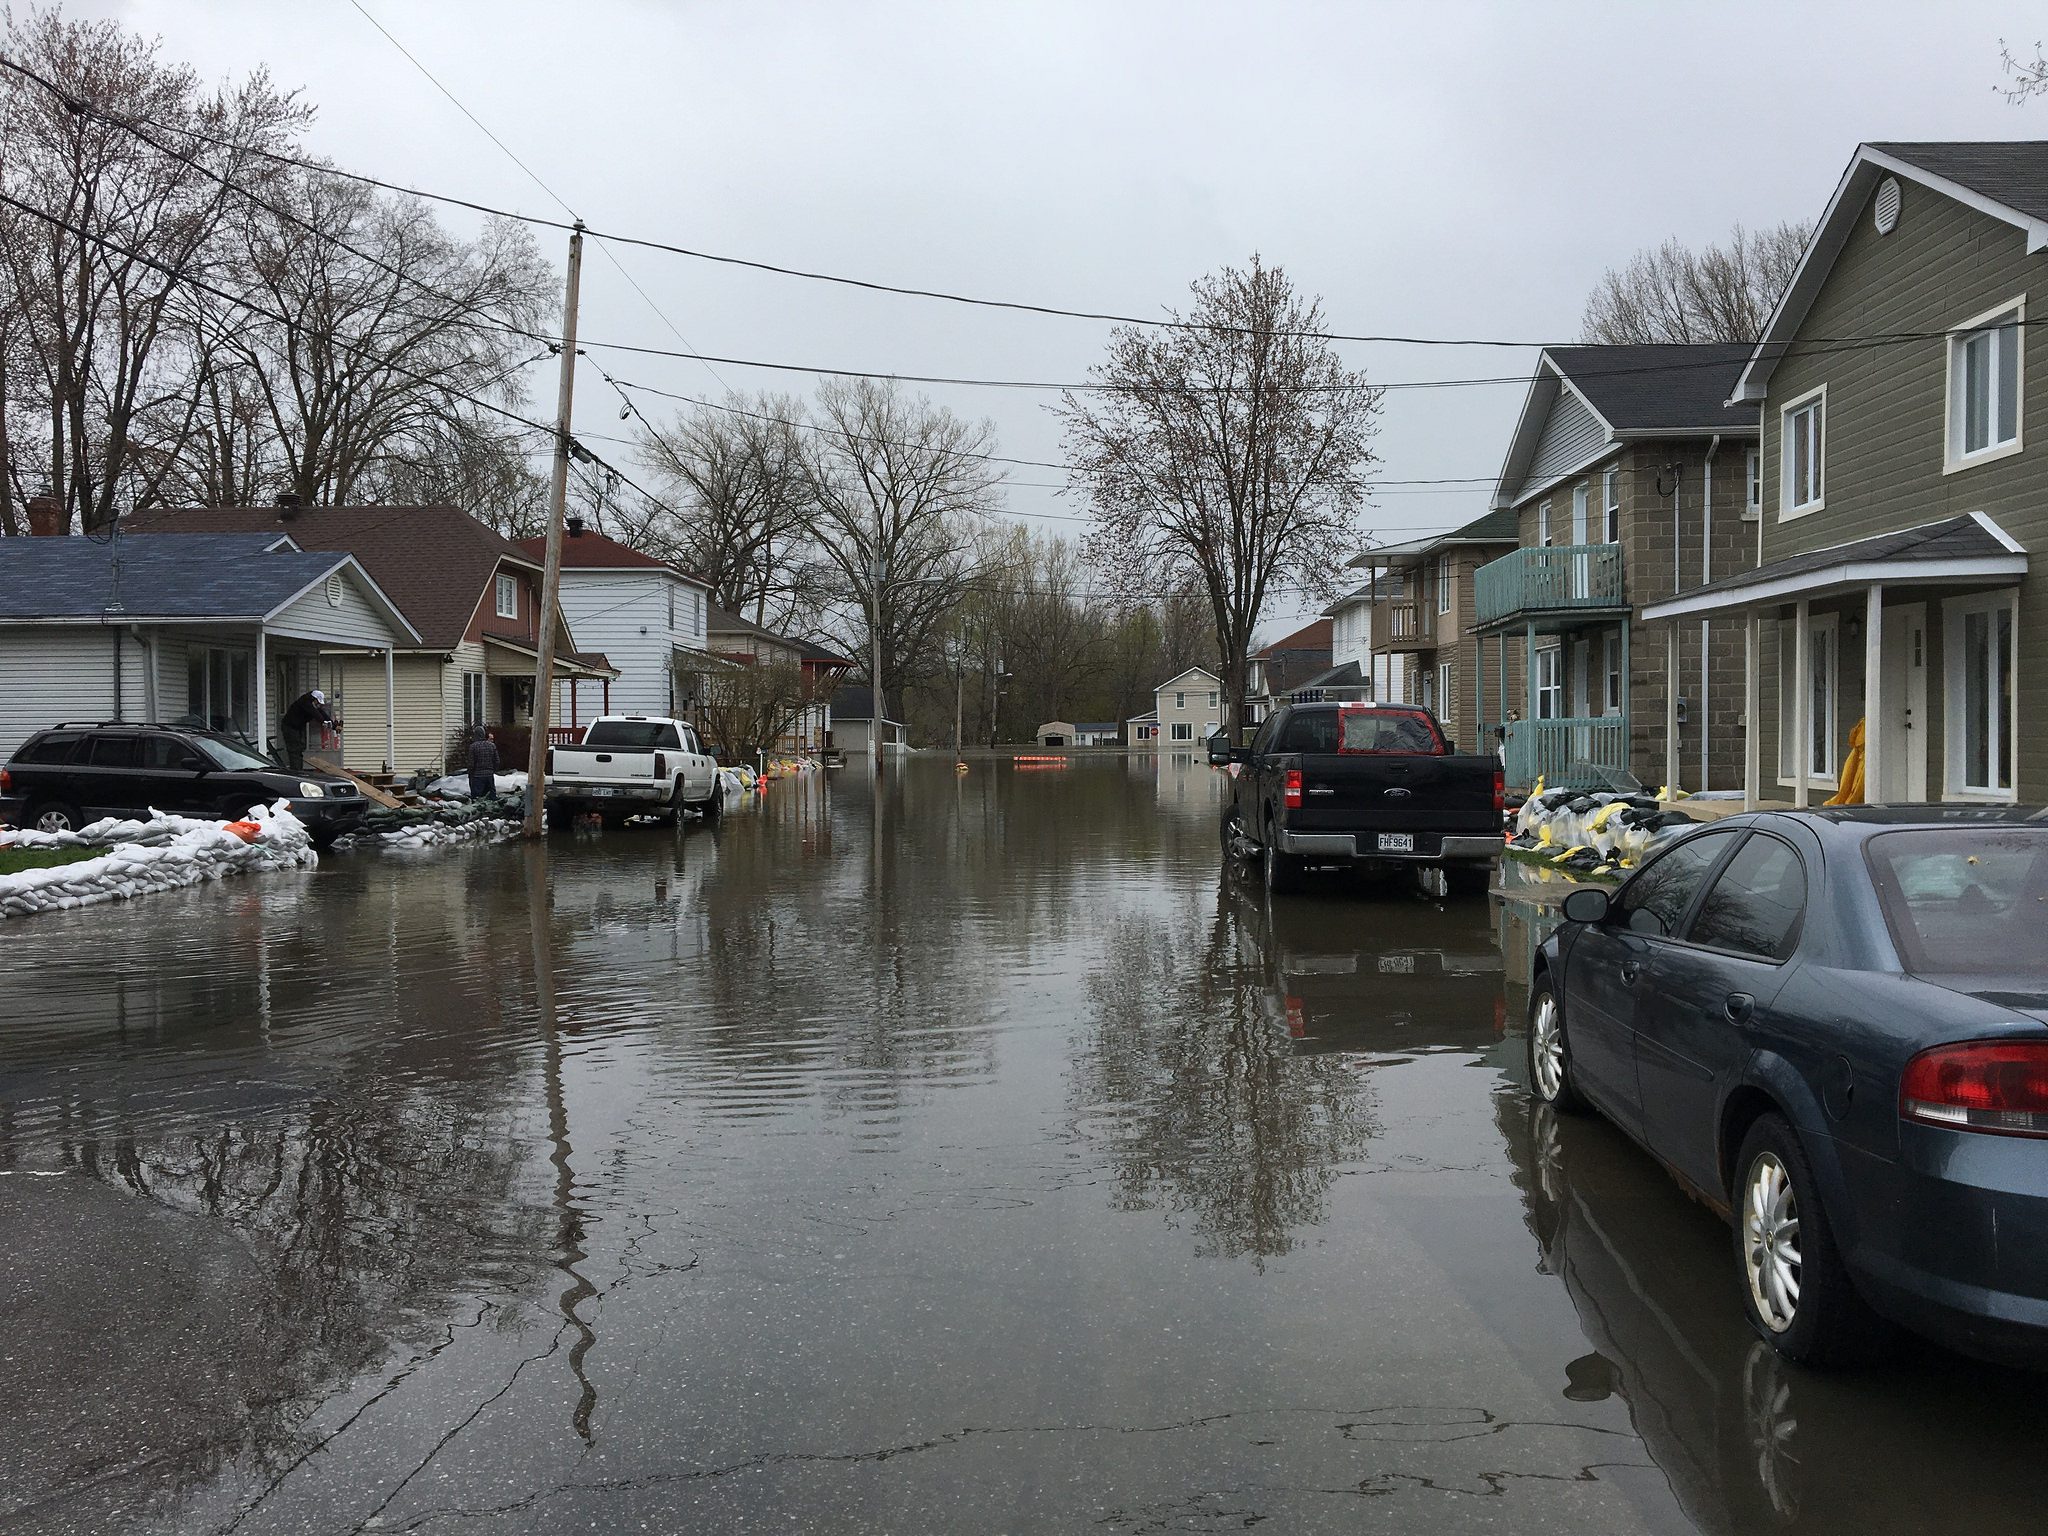 Flooding in the streets of Gatineau, Quebec.